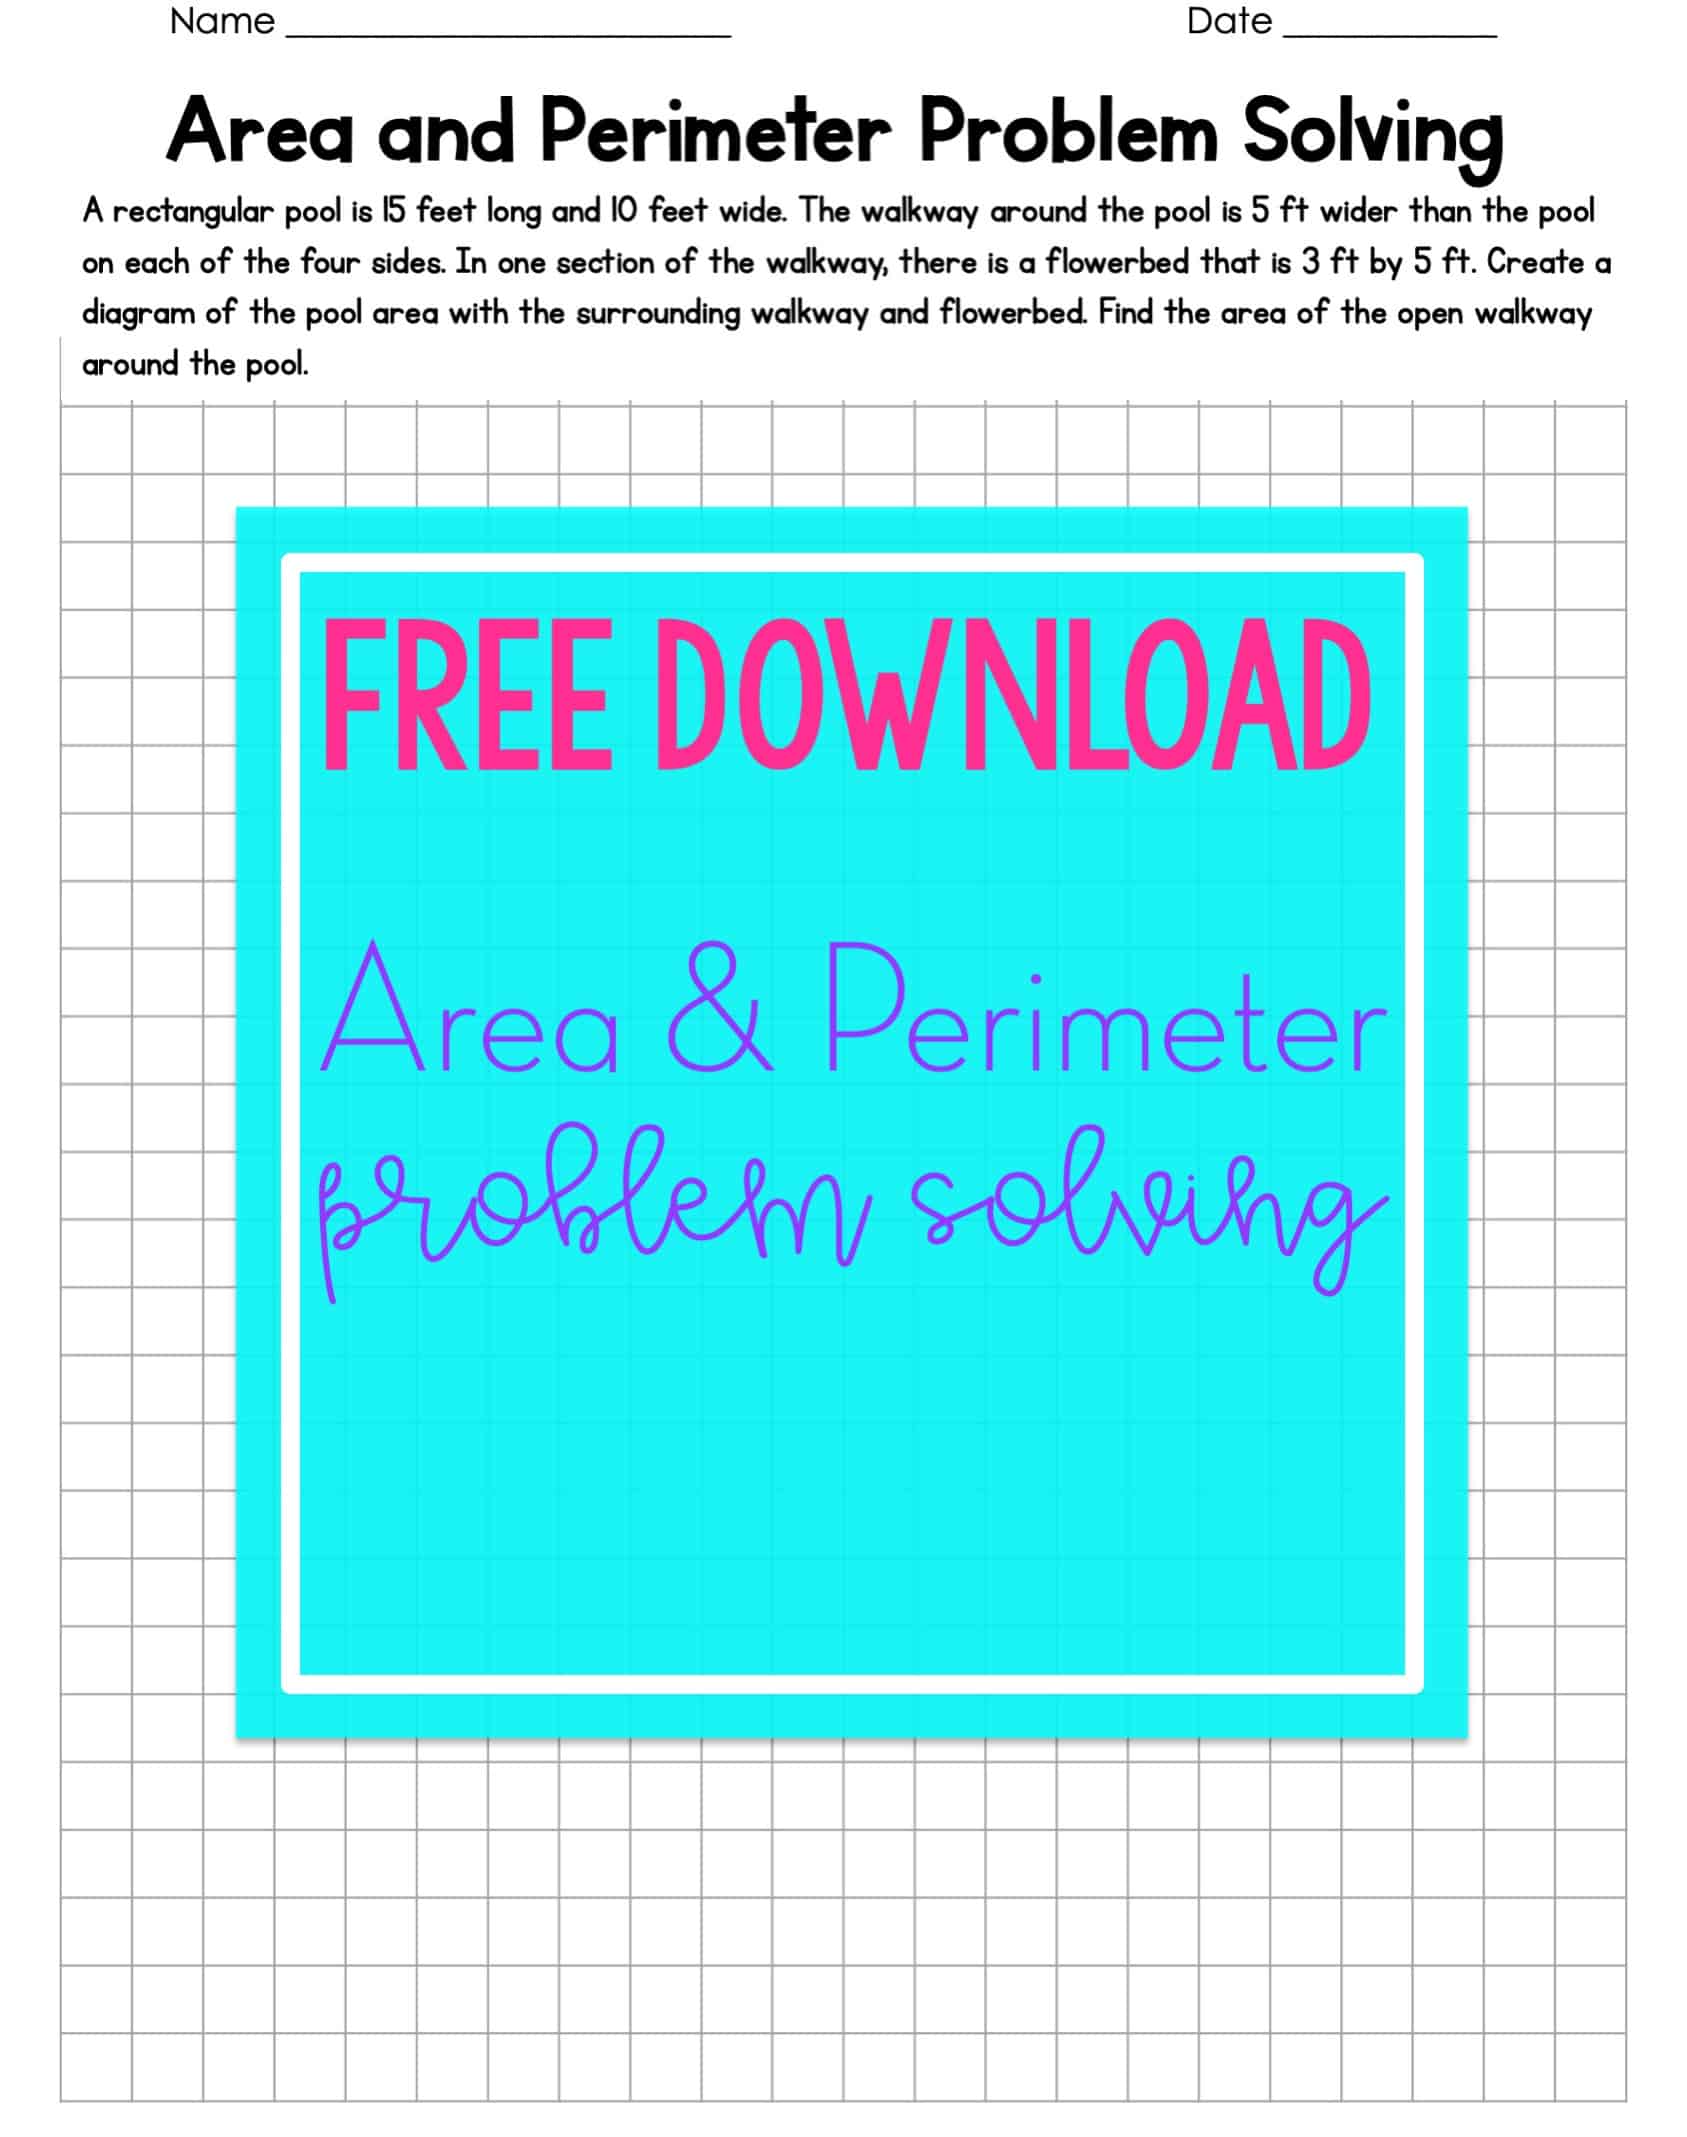 Free Download: Area and Perimeter Problem Solving